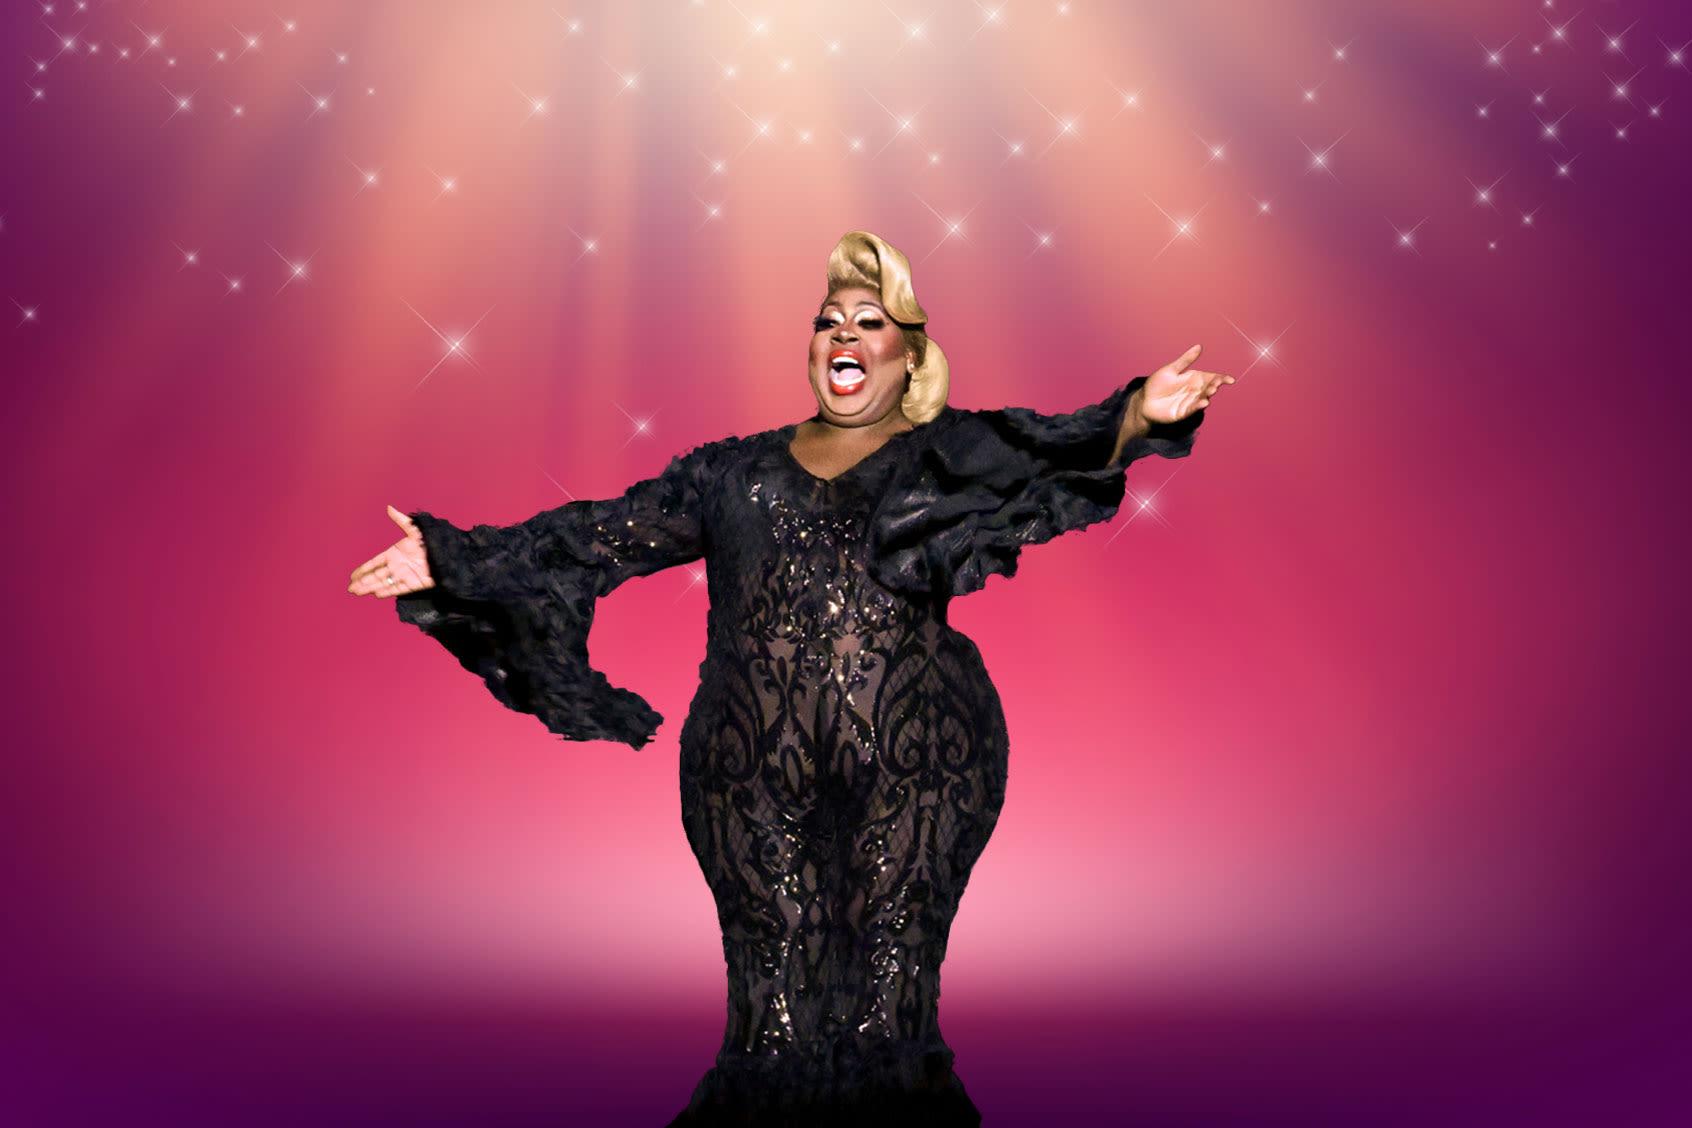 "There is nothing sexual about what I do – I'm a classy lady”: Latrice Royale champions drag queens